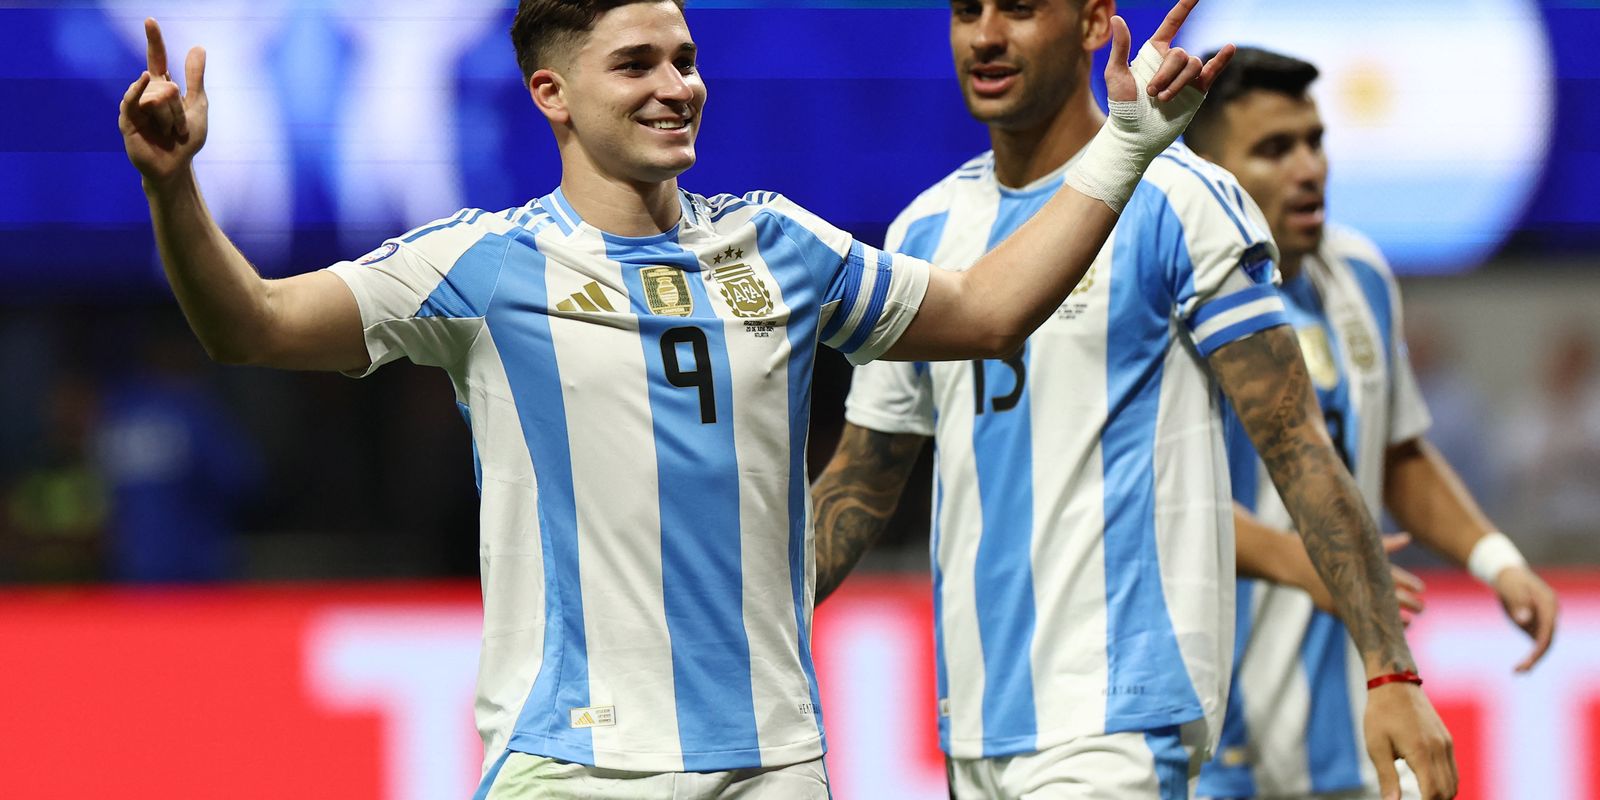 Copa América begins with Argentina's victory over Canada Latin